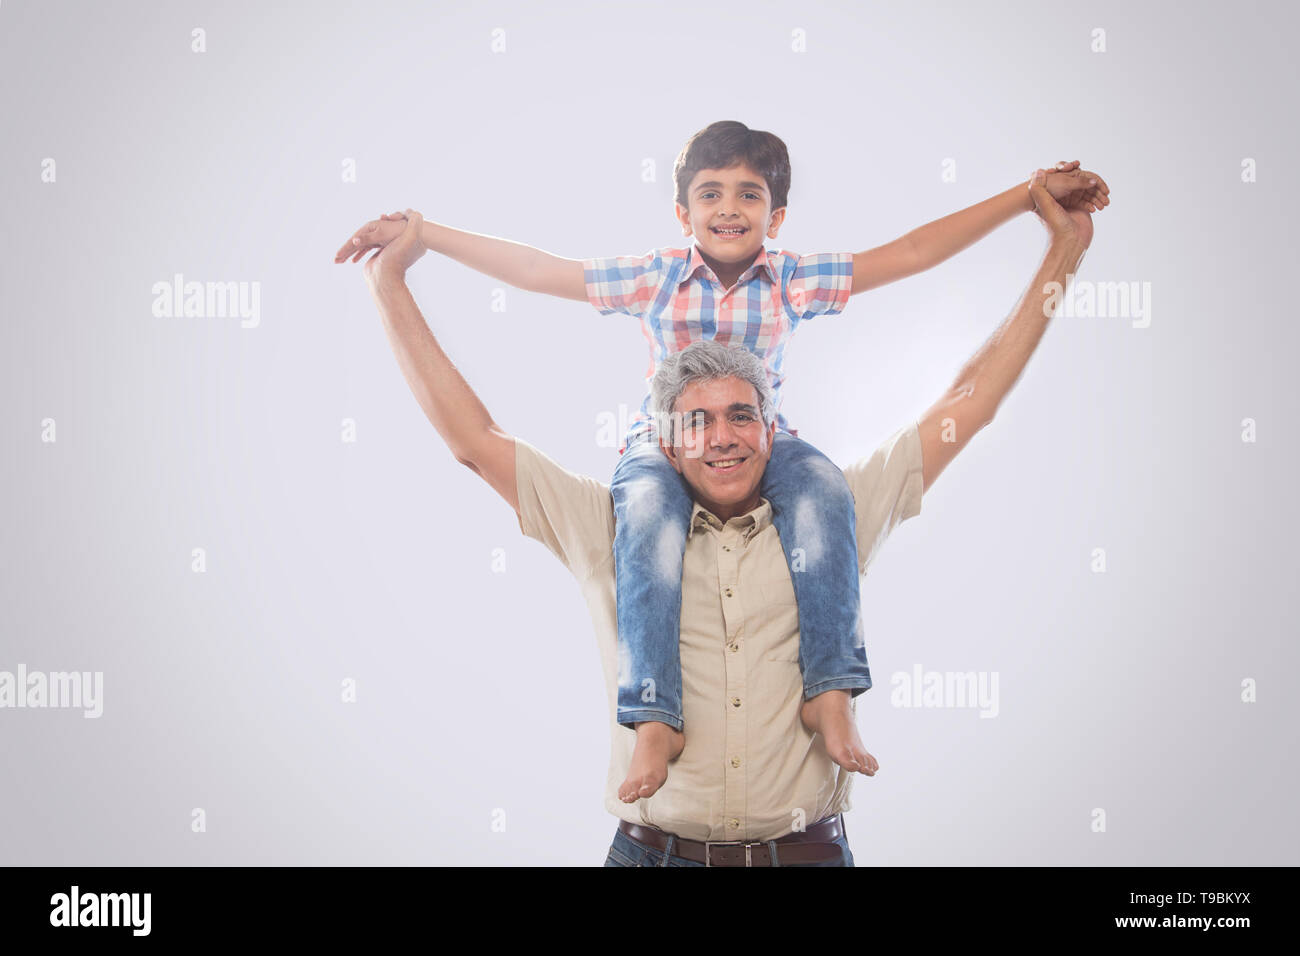 Grandfather carrying grandson on shoulders Stock Photo